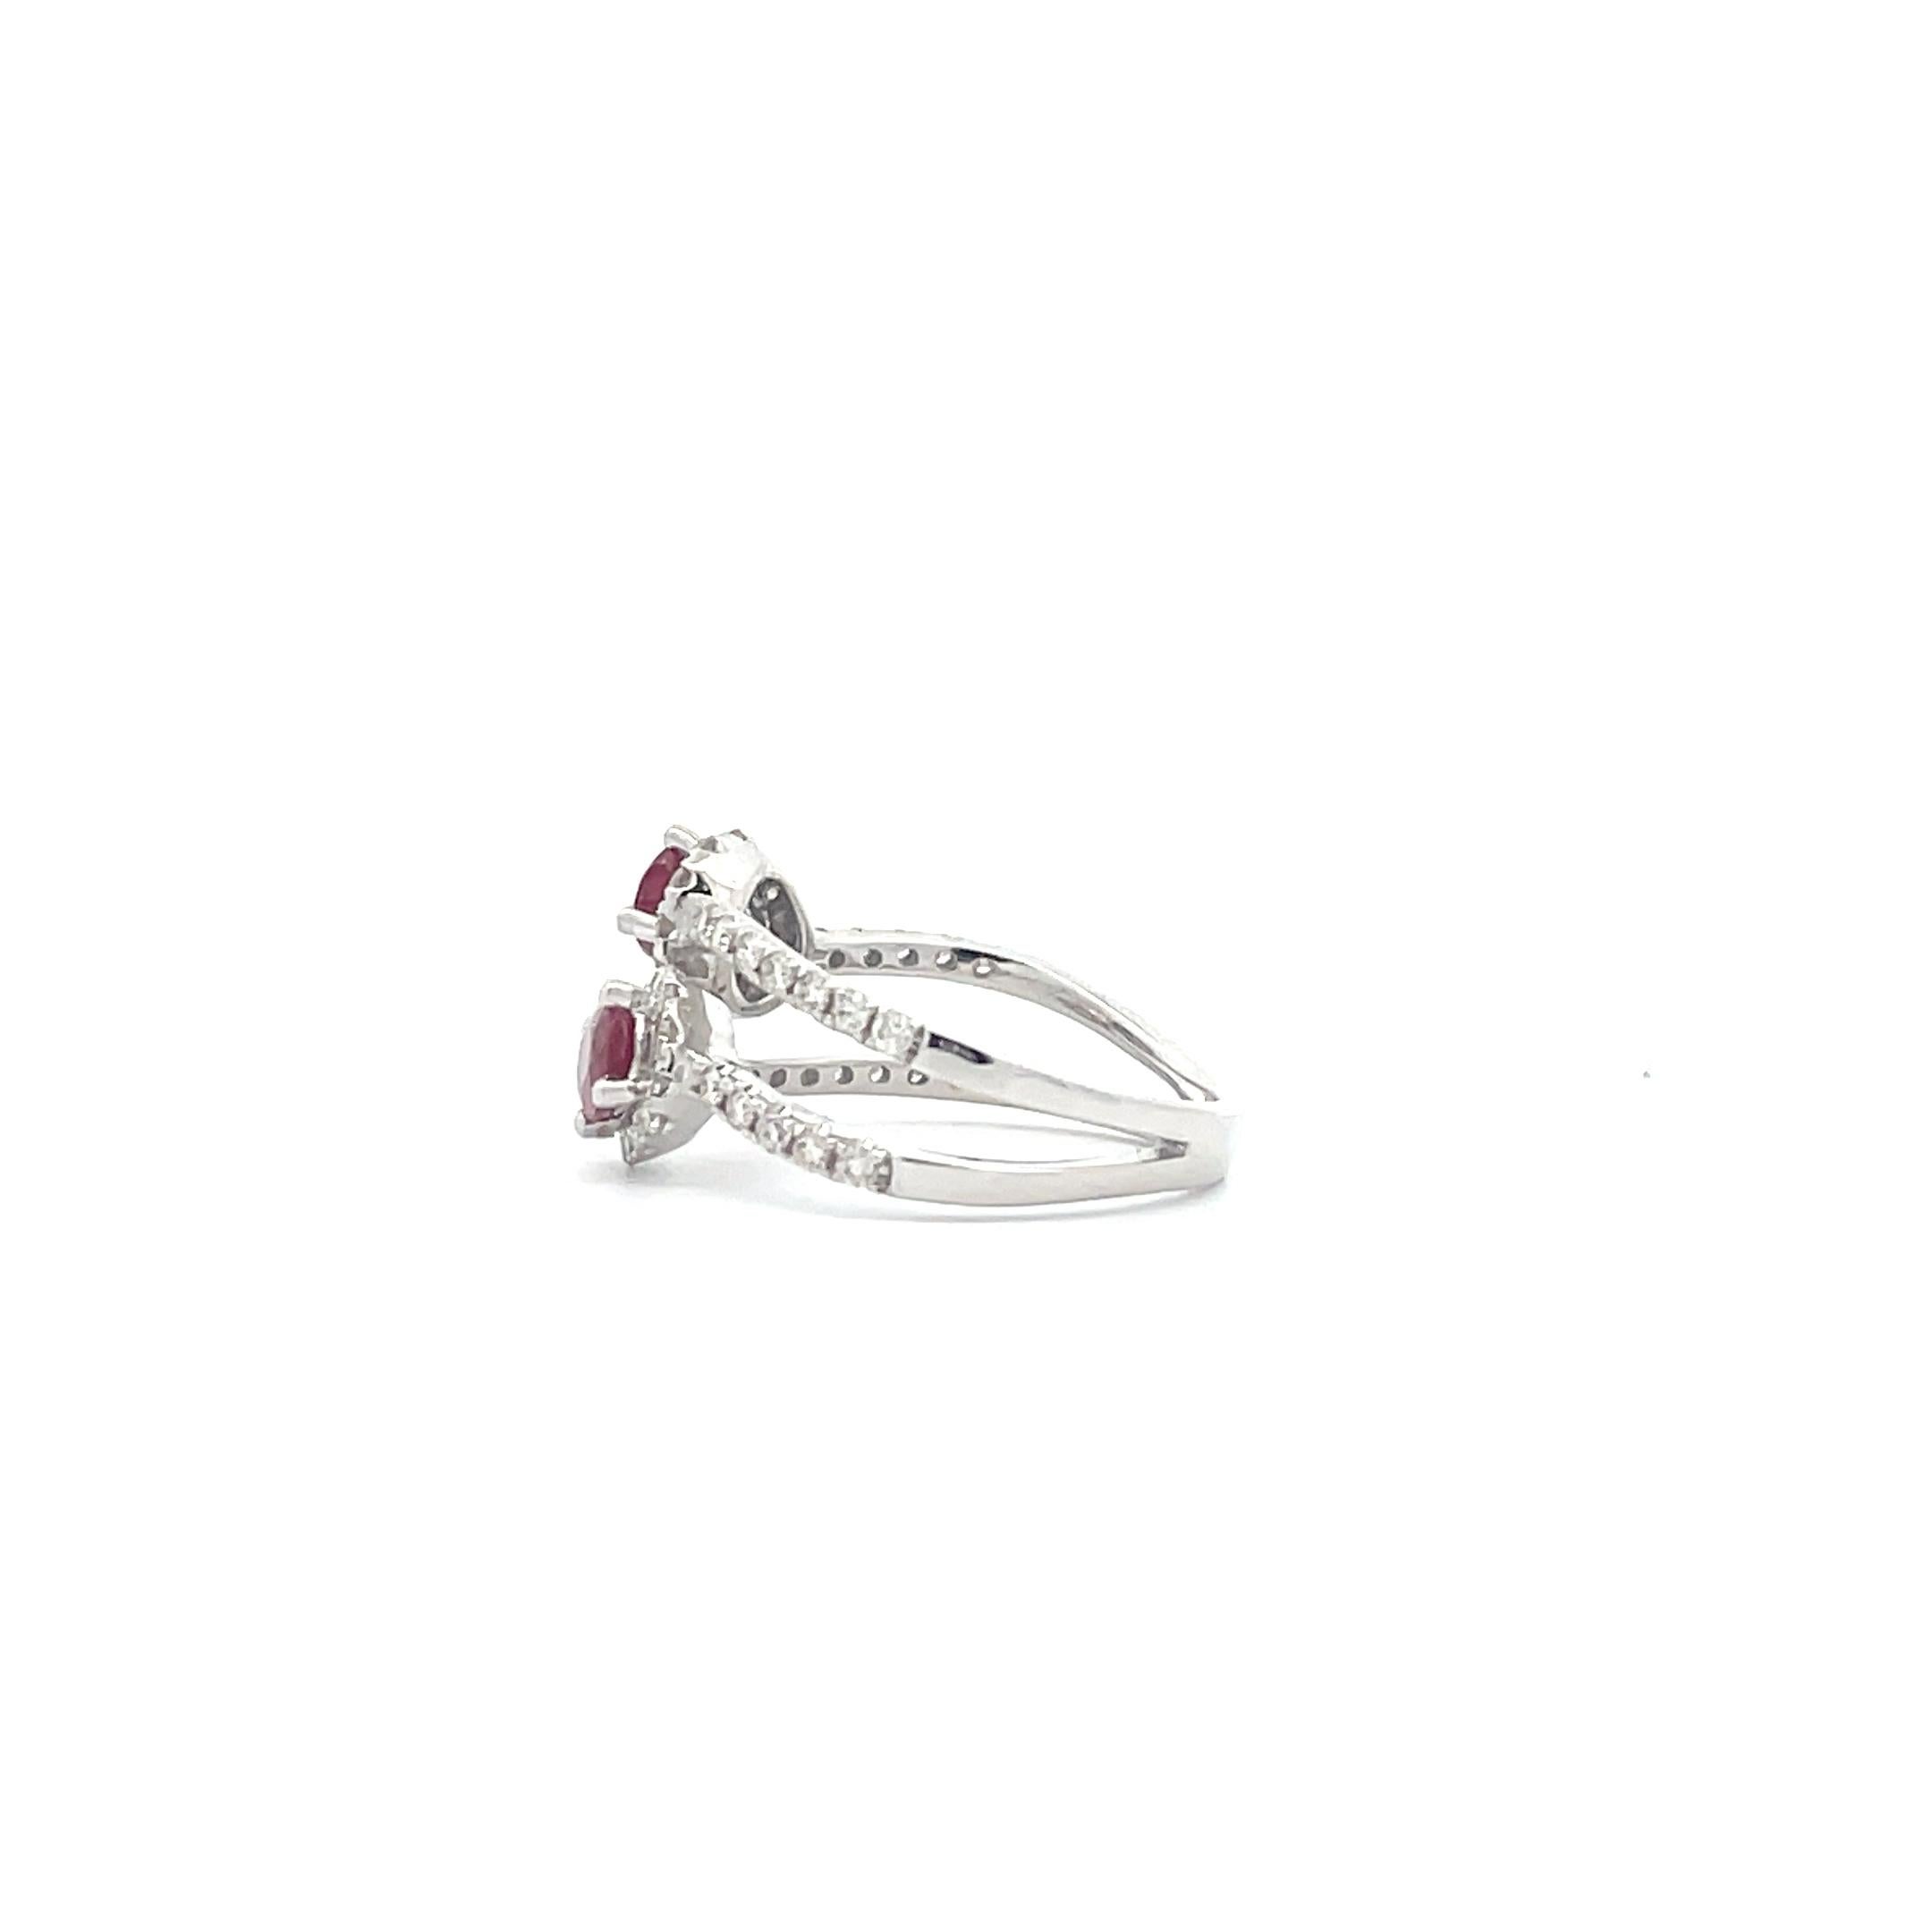 Ruby is said to be the stone of sincerity, and as such, this 1.06 ct. fancy deep red round cut ruby features a double strand design surrounded by dazzling diamonds of 0.63 ct.. Crafted by our professional artisans in 14K White Gold. This delicate,